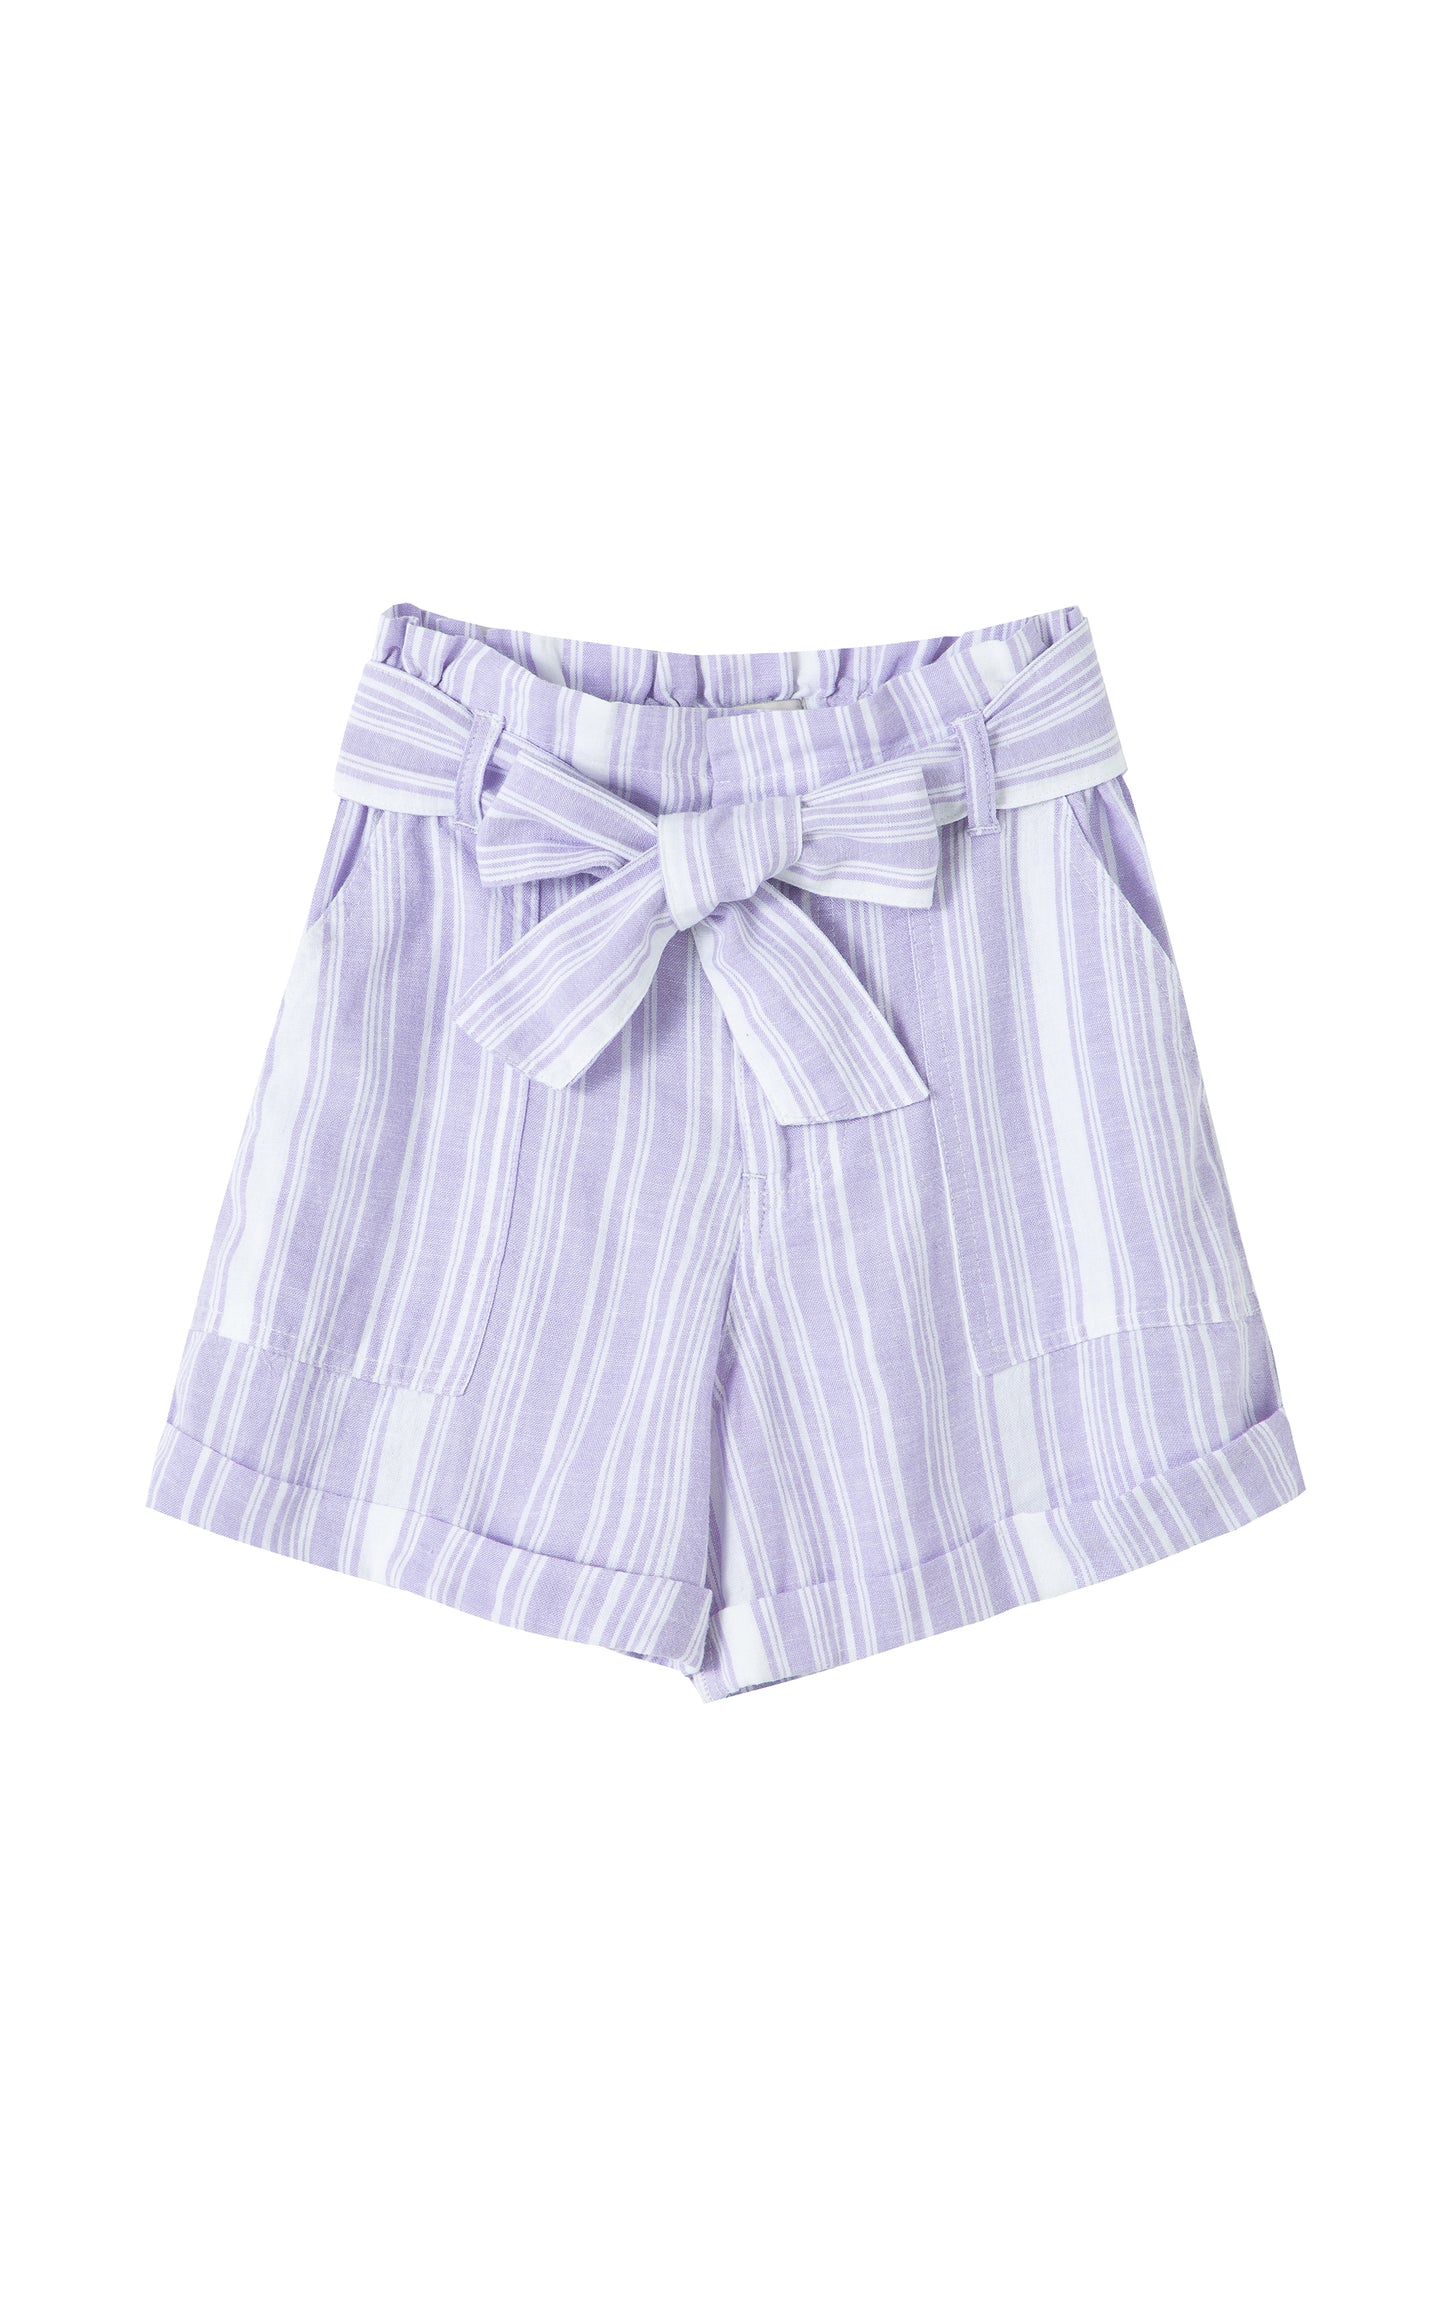 Front view of lilac paper bag shorts with white stripes 